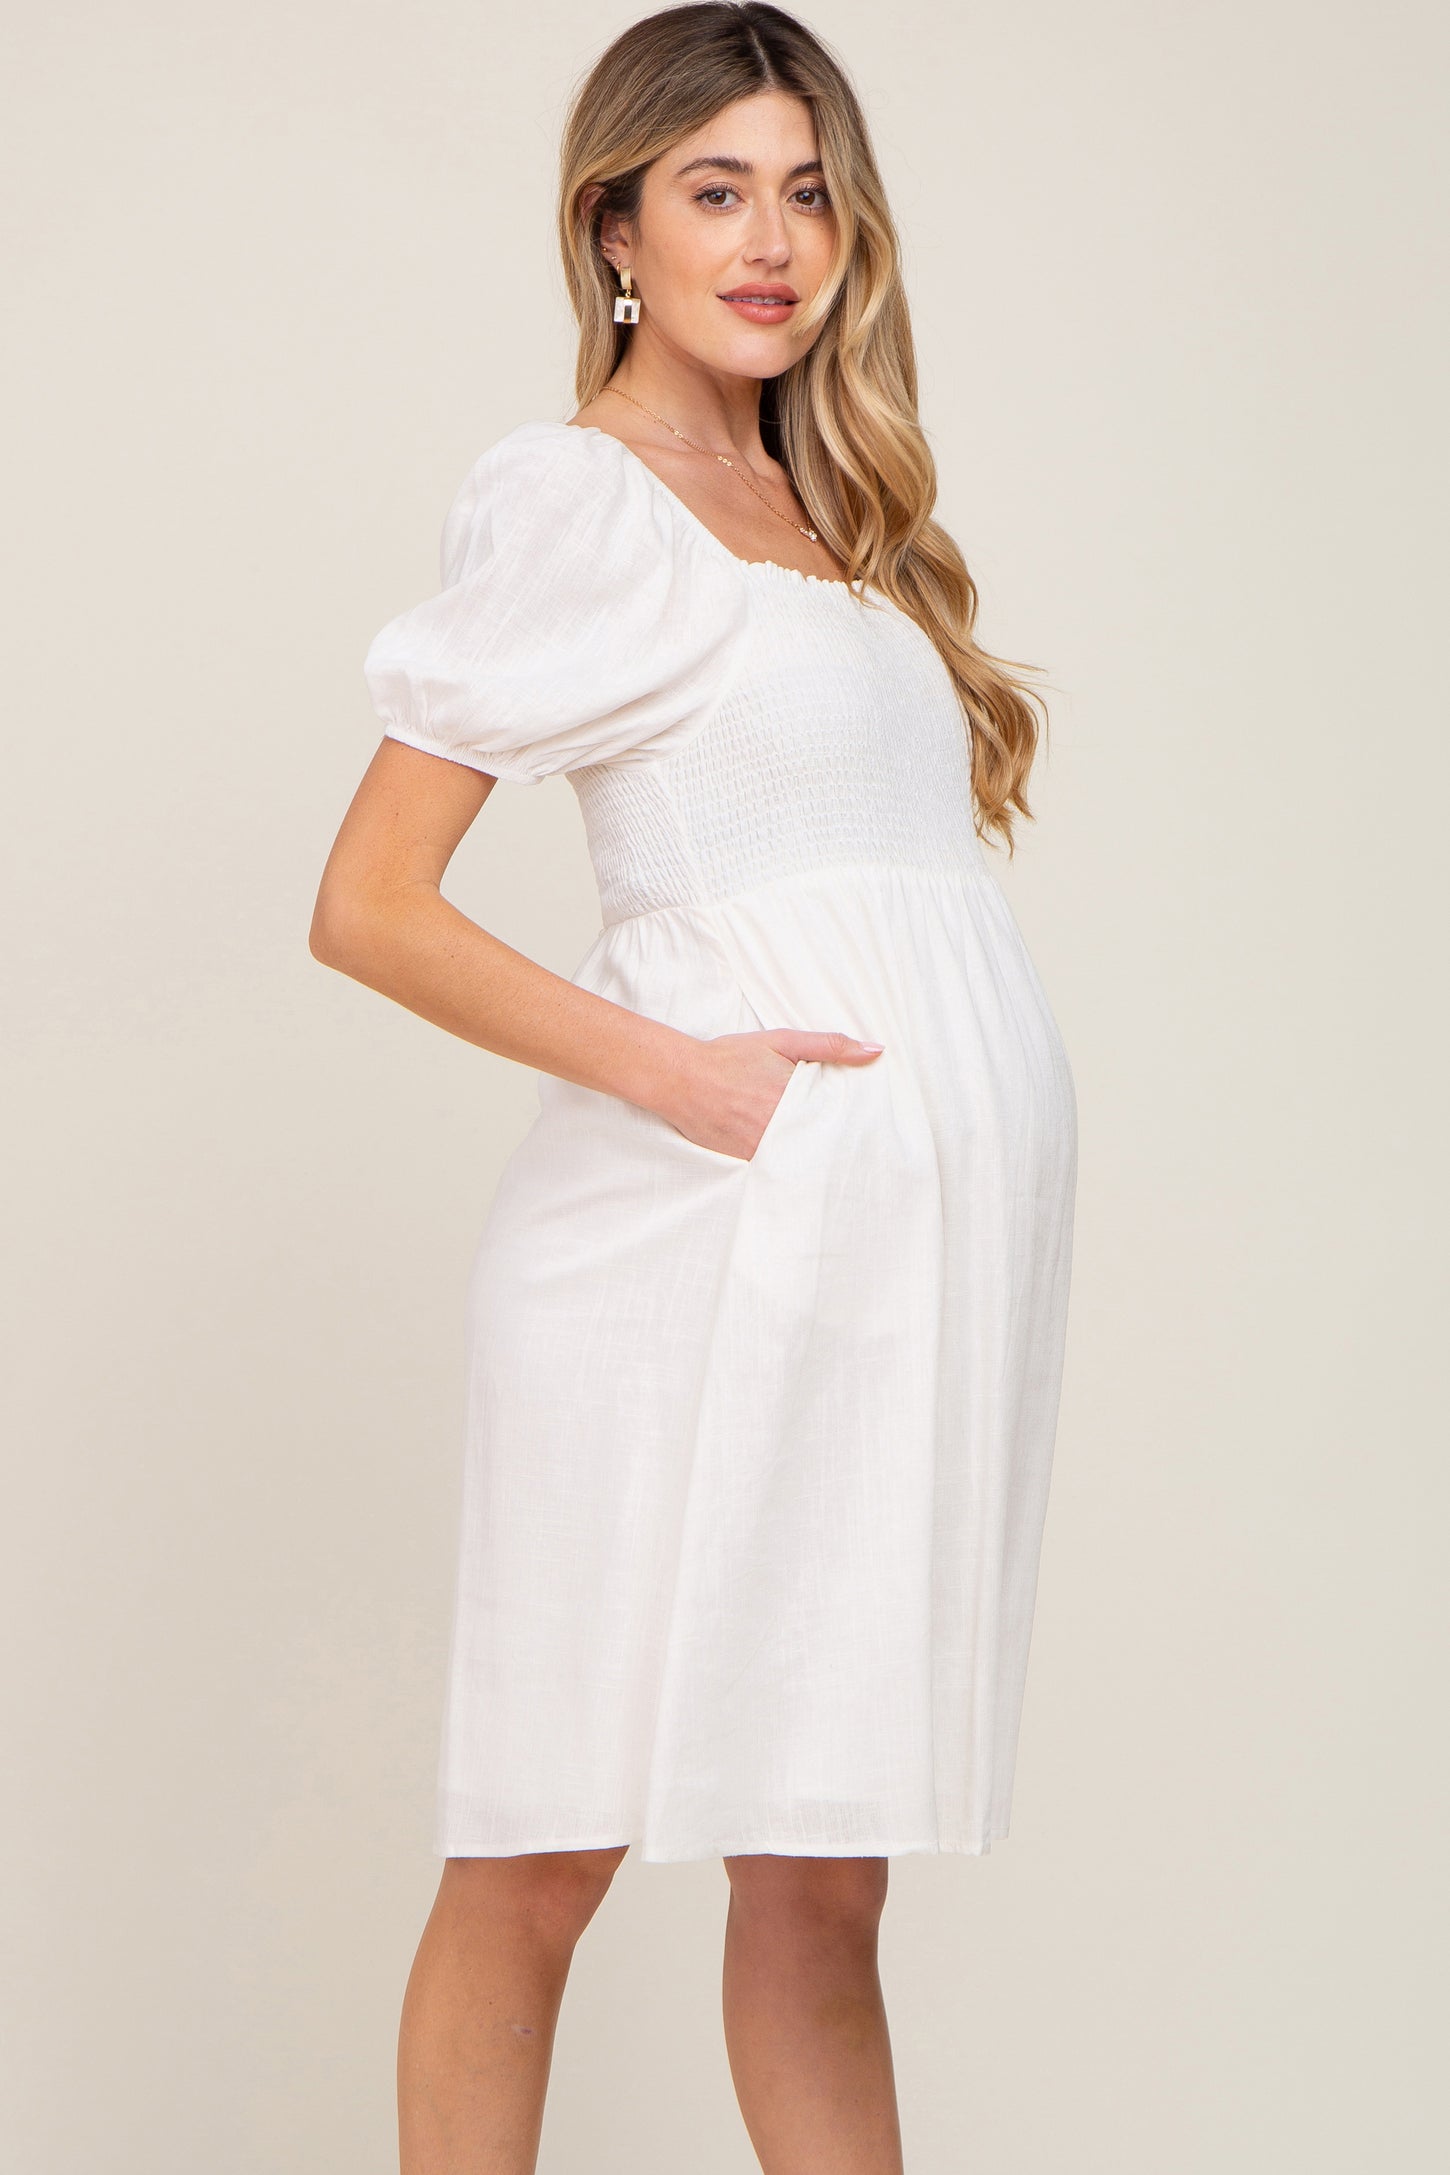 Pregnant Dresses 100% Cotton Solid Color Maternity Skirt Intimates